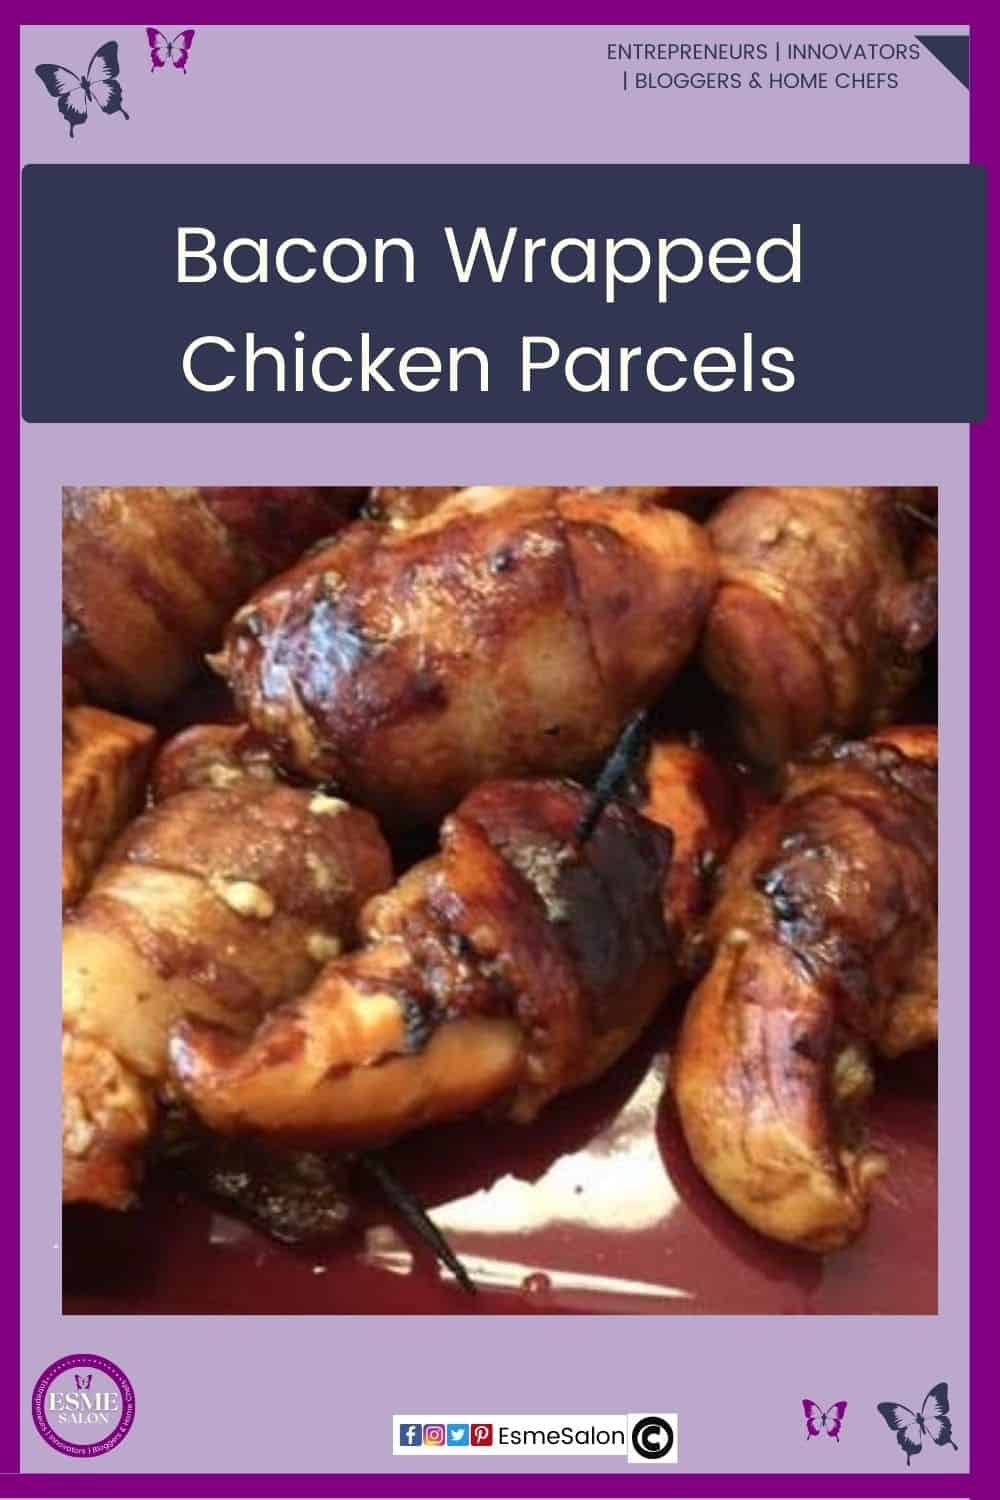 an image of Bacon Wrapped Chicken Parcels in marinade as well as some prepared on the BBQ